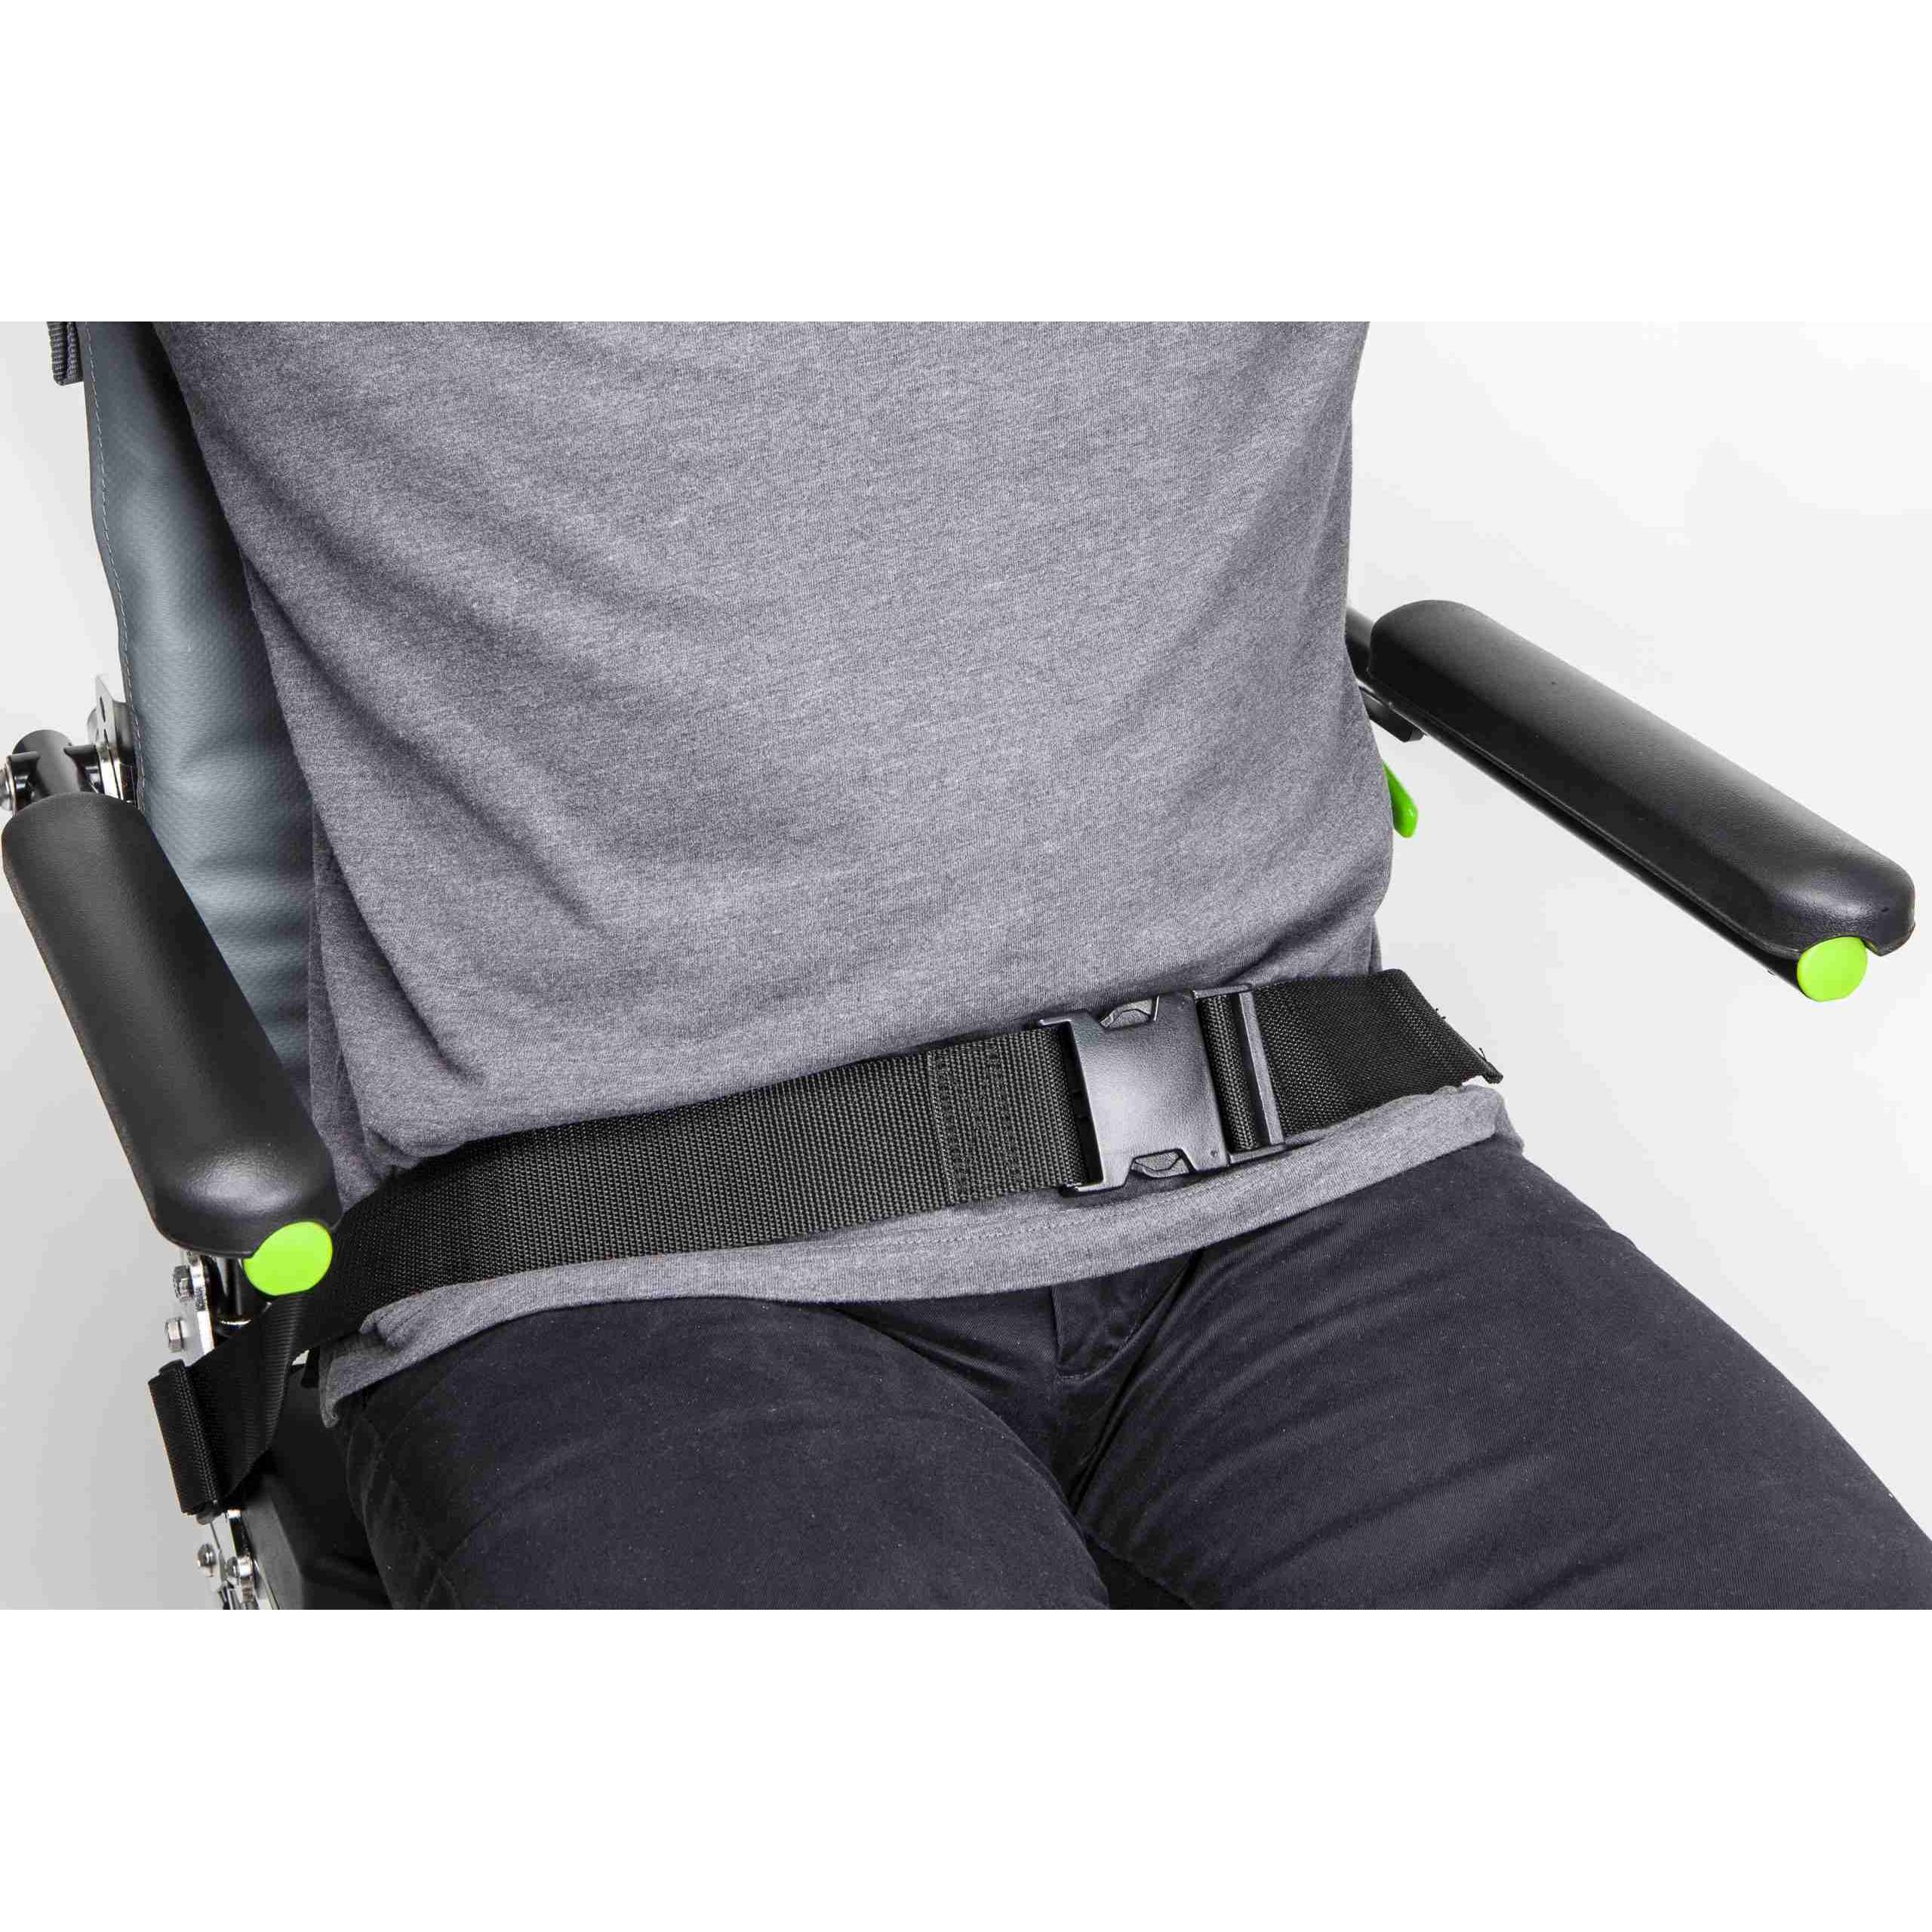 Pelvic Belt - Small (2 piece with side release buckle) (for 14" - 16" seat frame widths) (ZPBS)